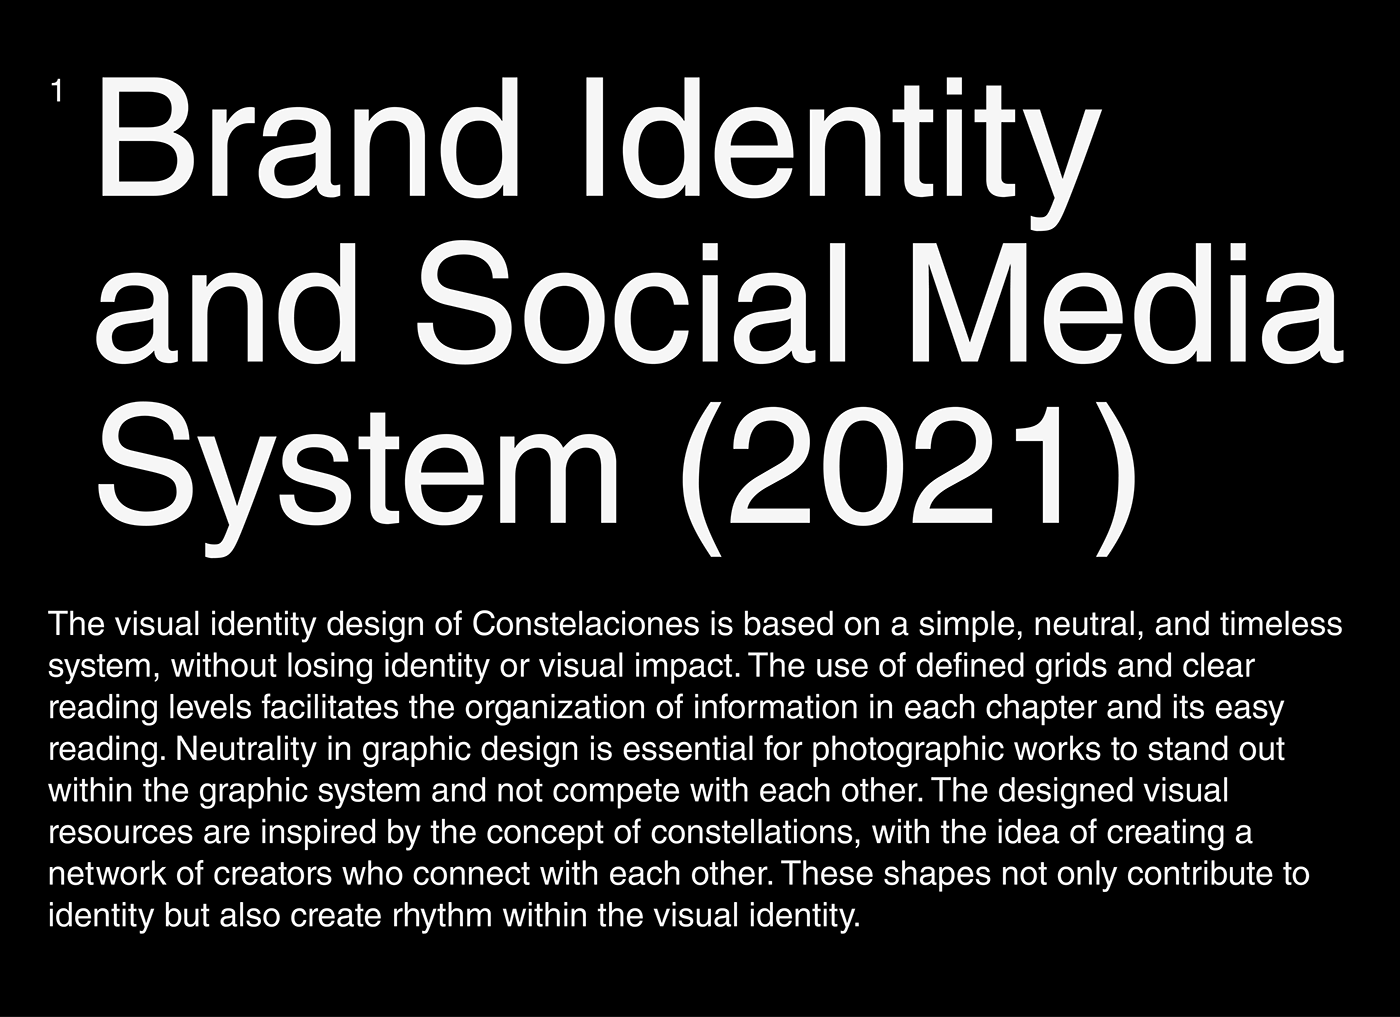 Description of the Visual Identity of Constelaciones, Its Components, and Key Aspects